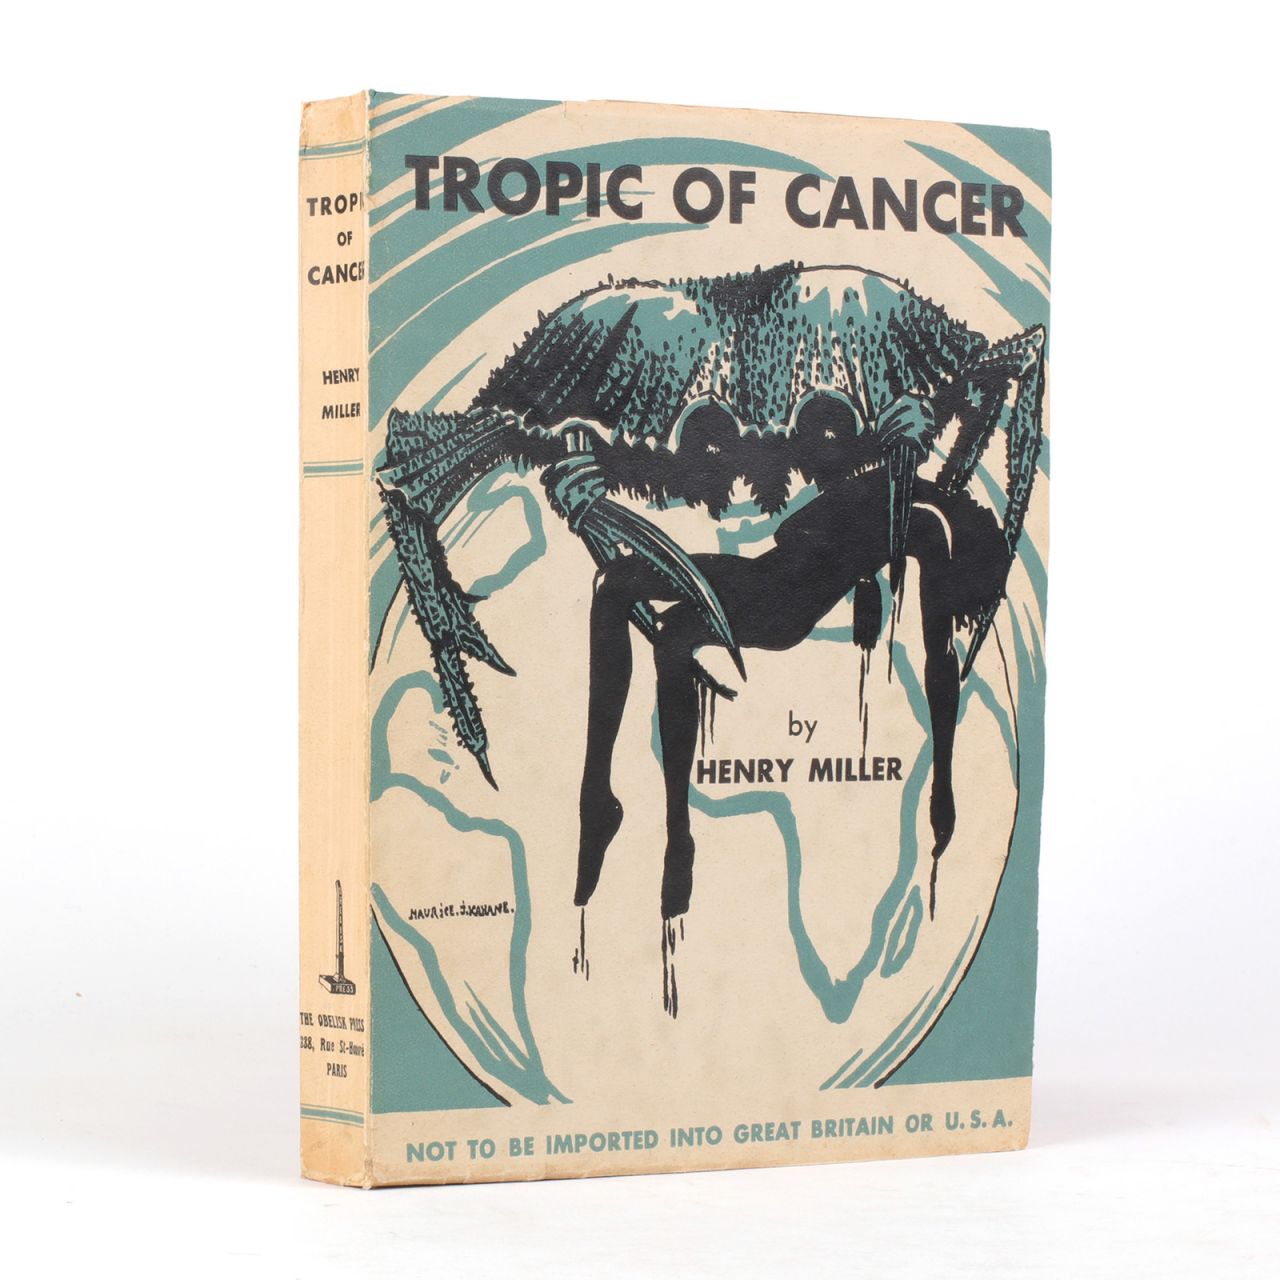 05 banned books saatchi gallery tropic of cancer